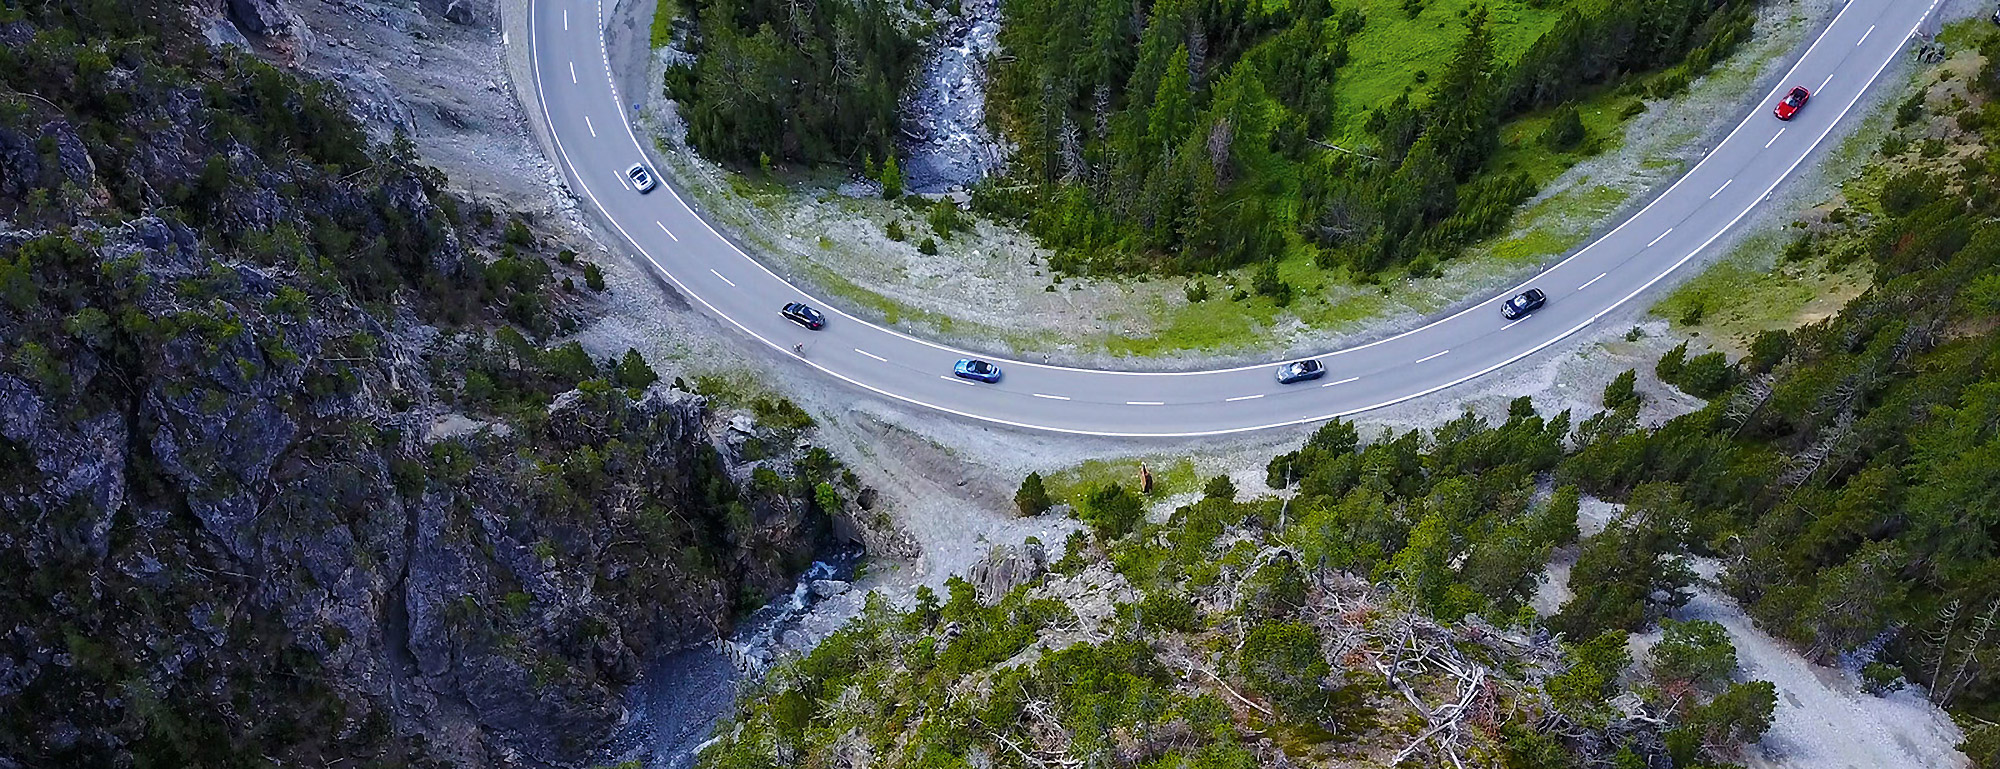 Cars drive through a sweeping bend in the mountains